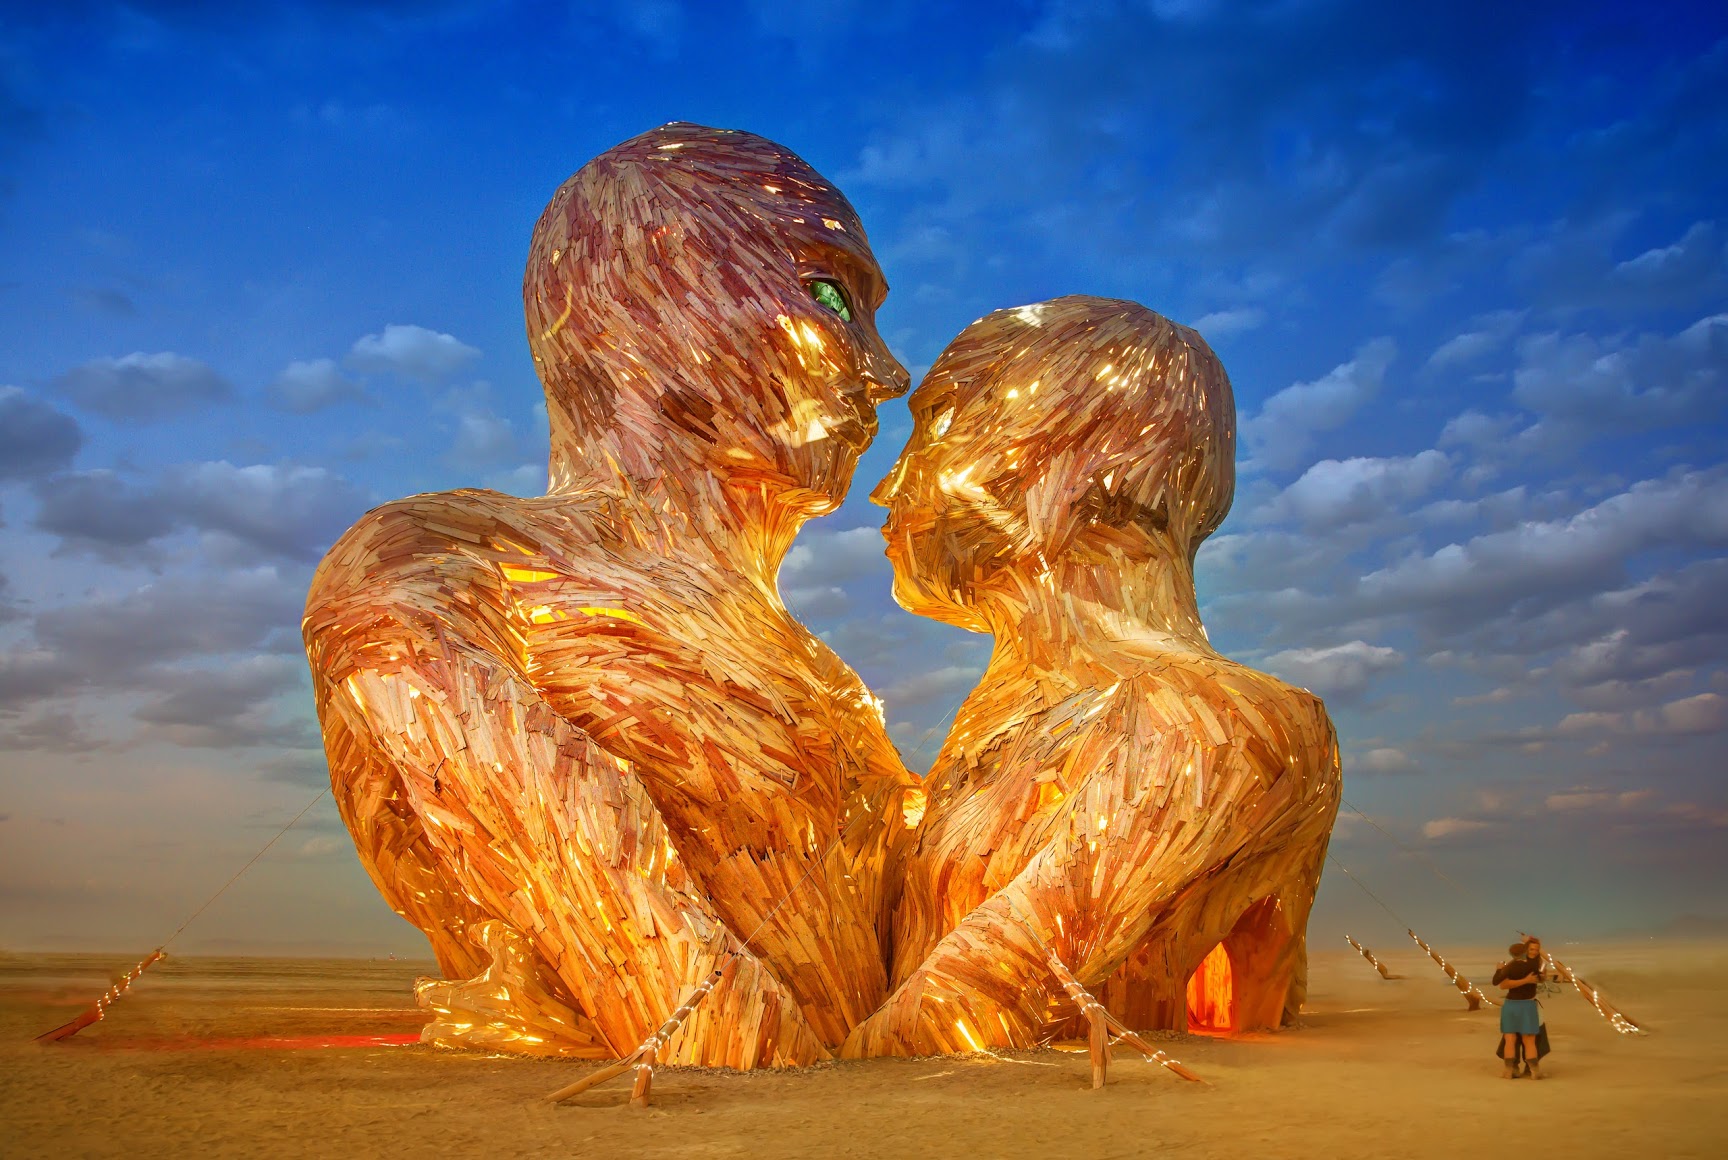 Watch Burning Man’s 72- Foot Tall ‘Embrace’ Structure In Flames!